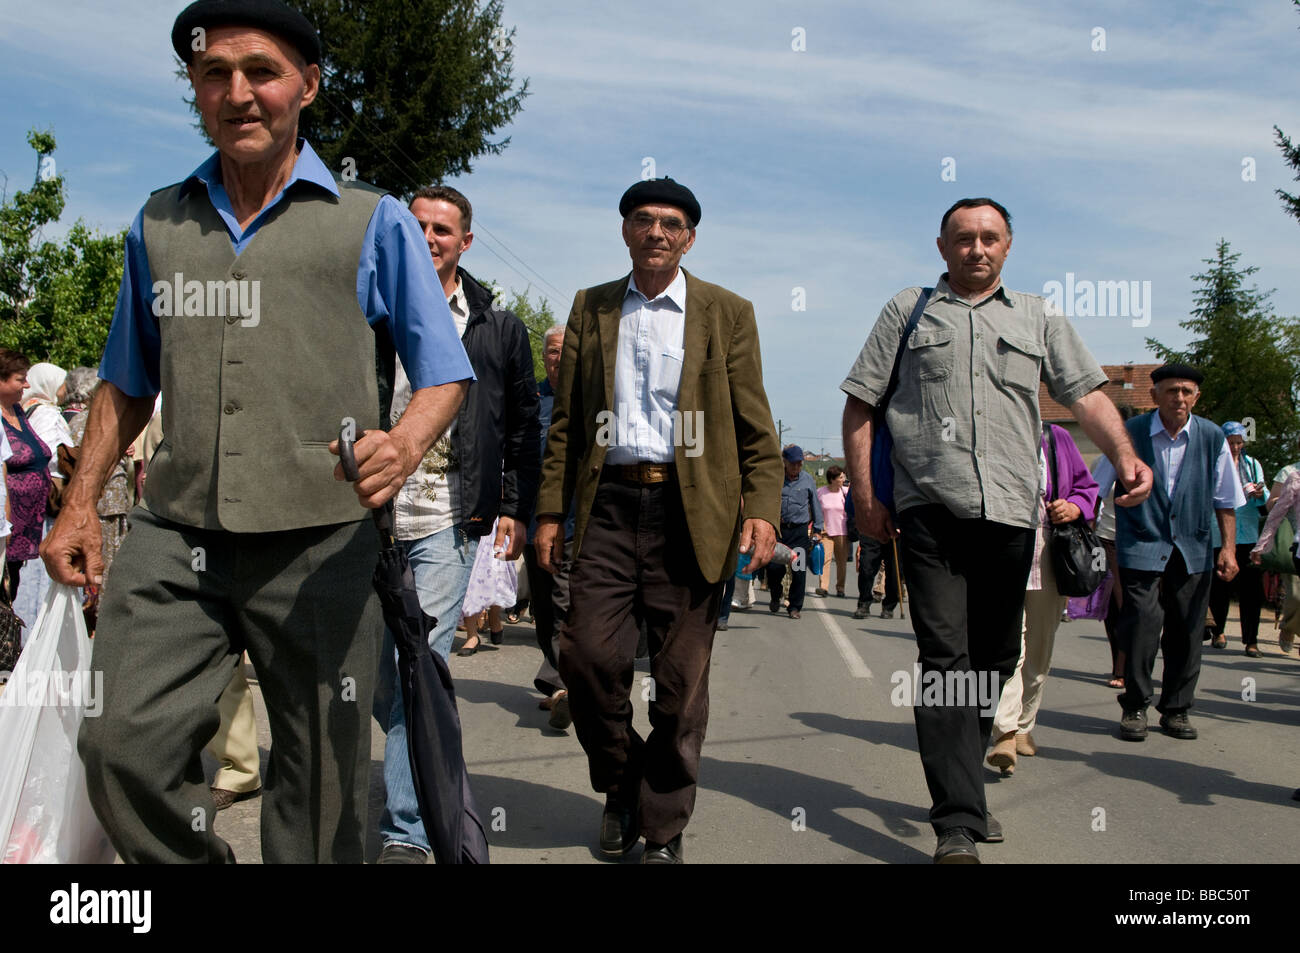 Muslim Bosniaks or Bosniacs going to a reburial of victims of the Srebrenica massacre in Republika Srpska an entity of Bosnia and Herzegovina Stock Photo